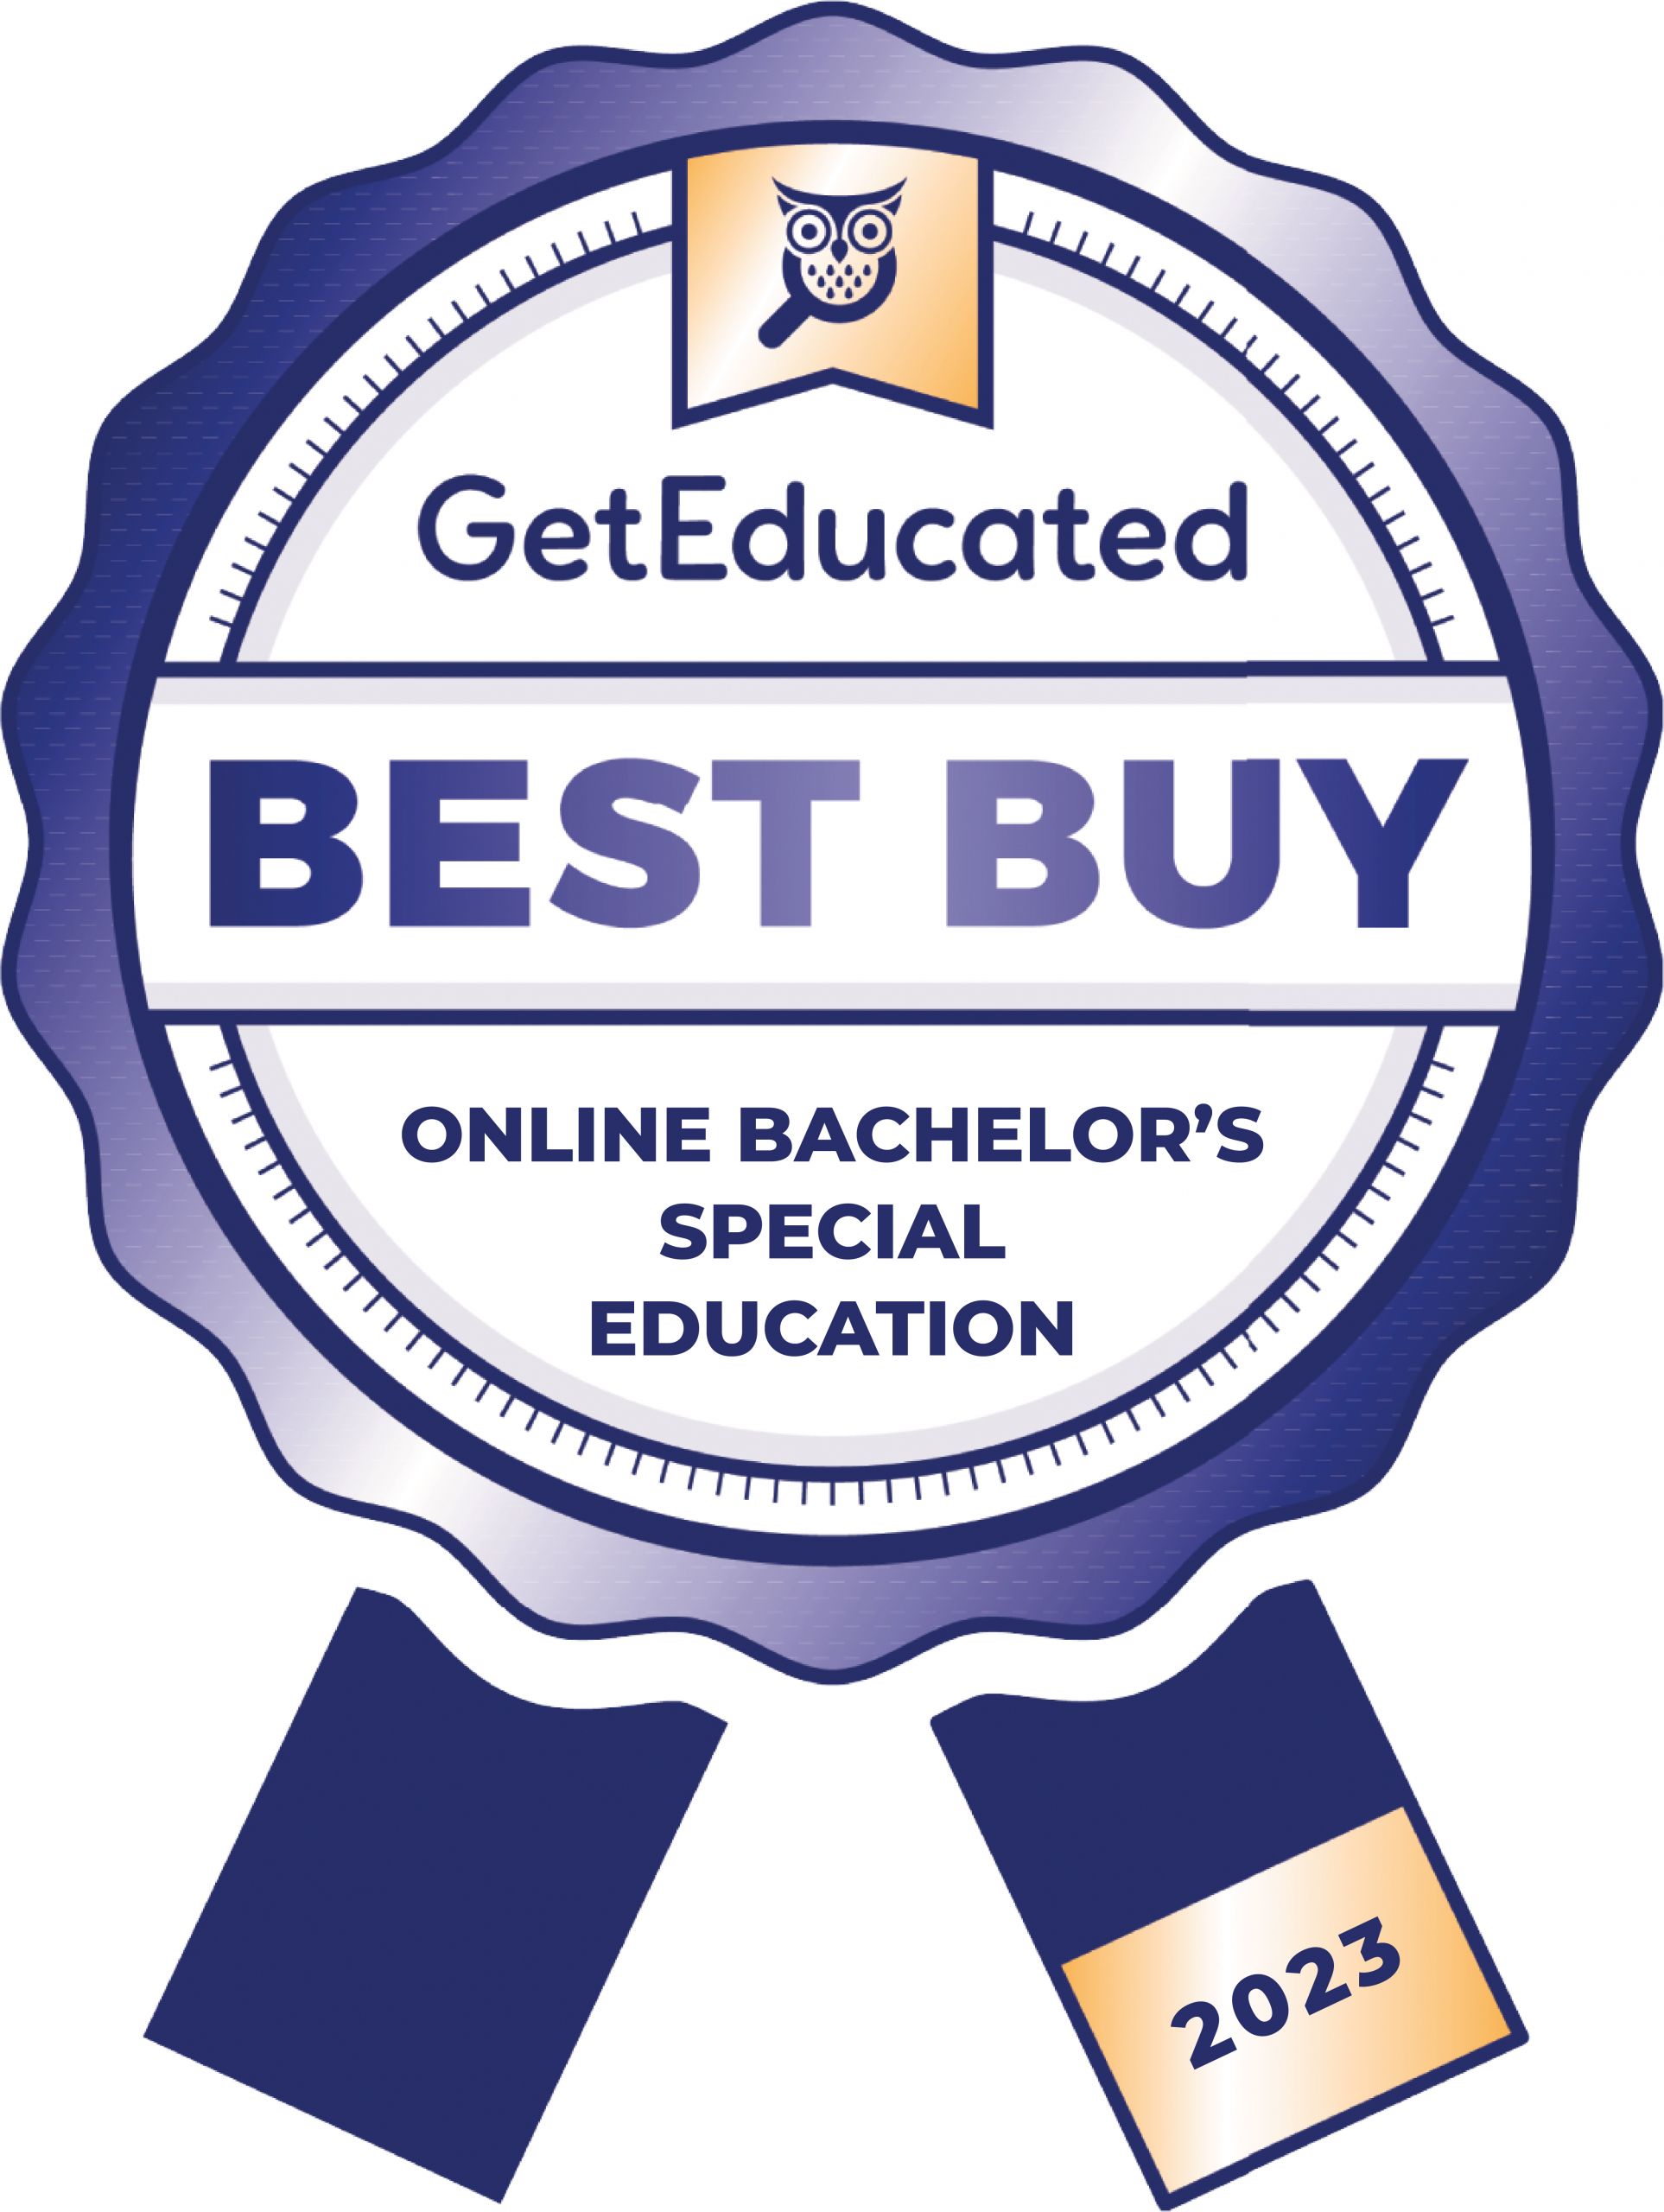 Rankings of the most affordable special education bachelor's degree online